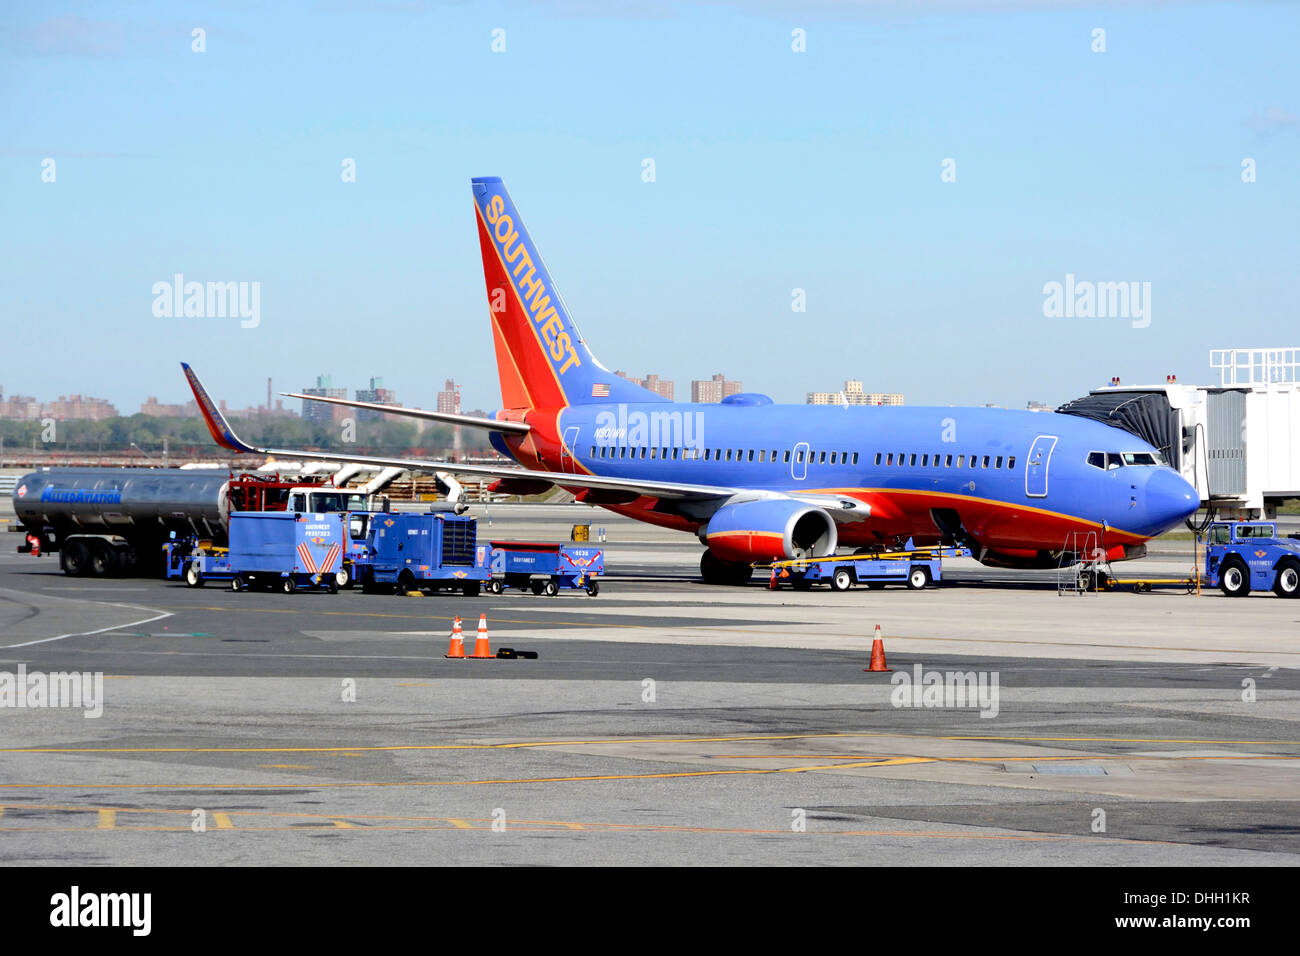 A Southwest airline 737 parks at the passenger gate at the LaGuardia Airport, New York, N.Y., October 12, 2013. Stock Photo